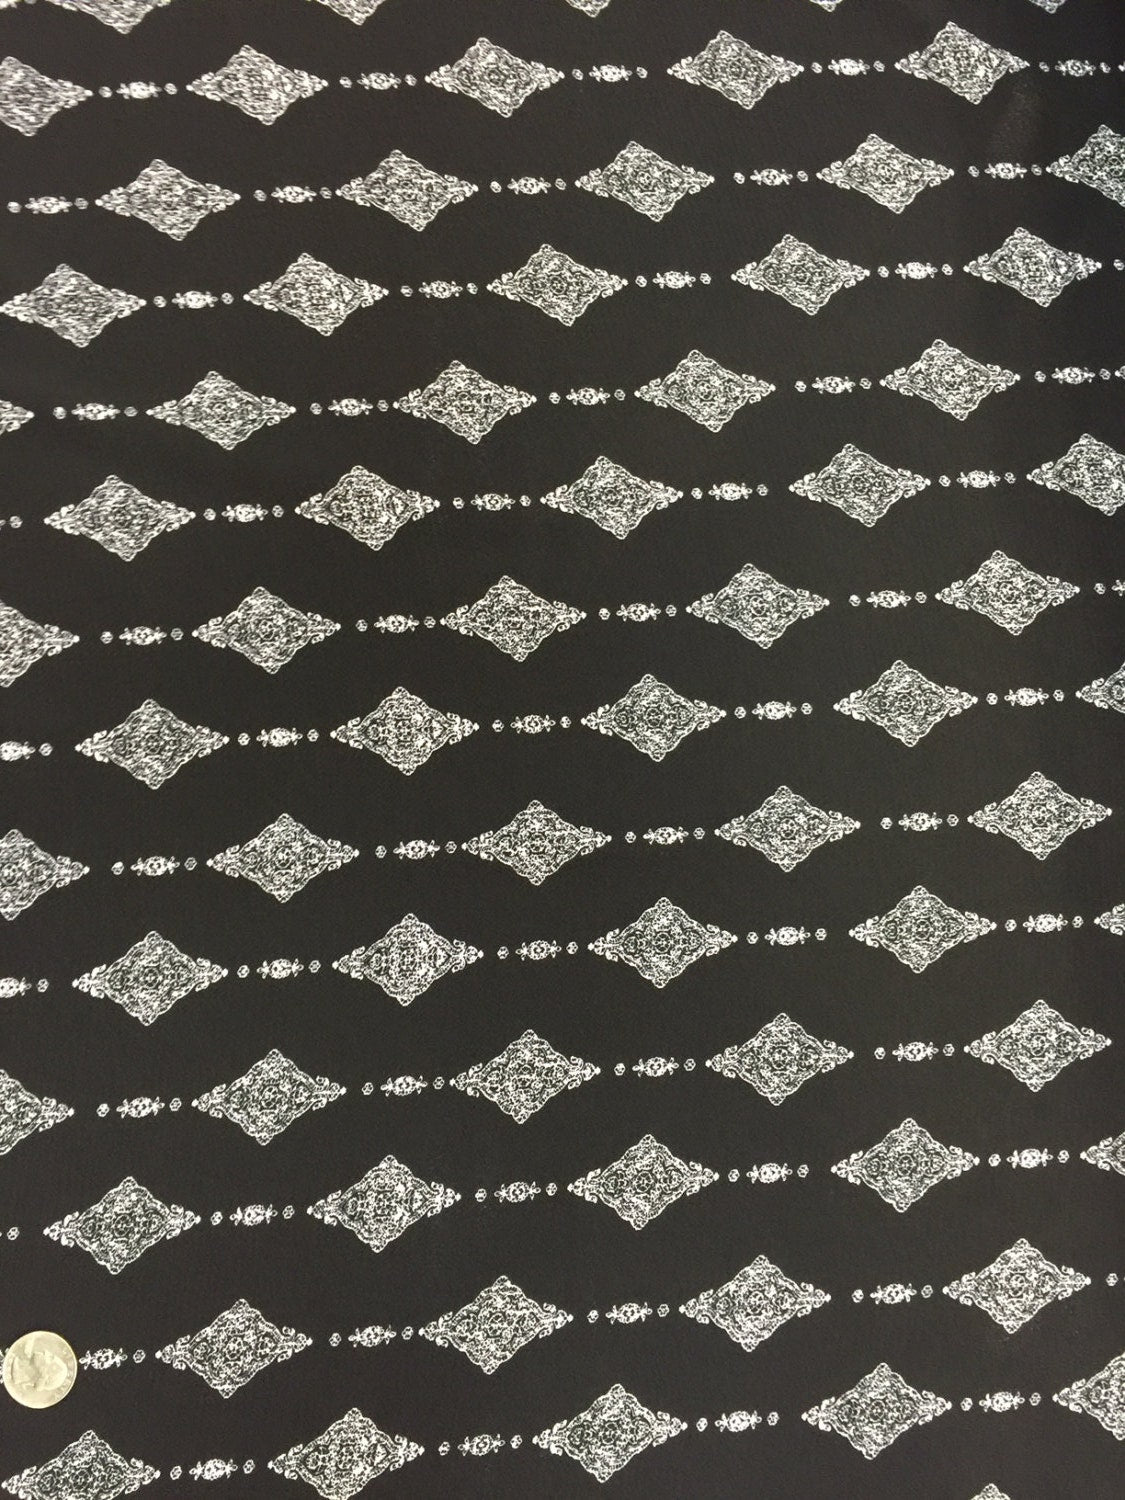 Boho crepe Black White 58-60 in w Fabric sold by the yard 1 way stretch flowy draping decoration clothing dress